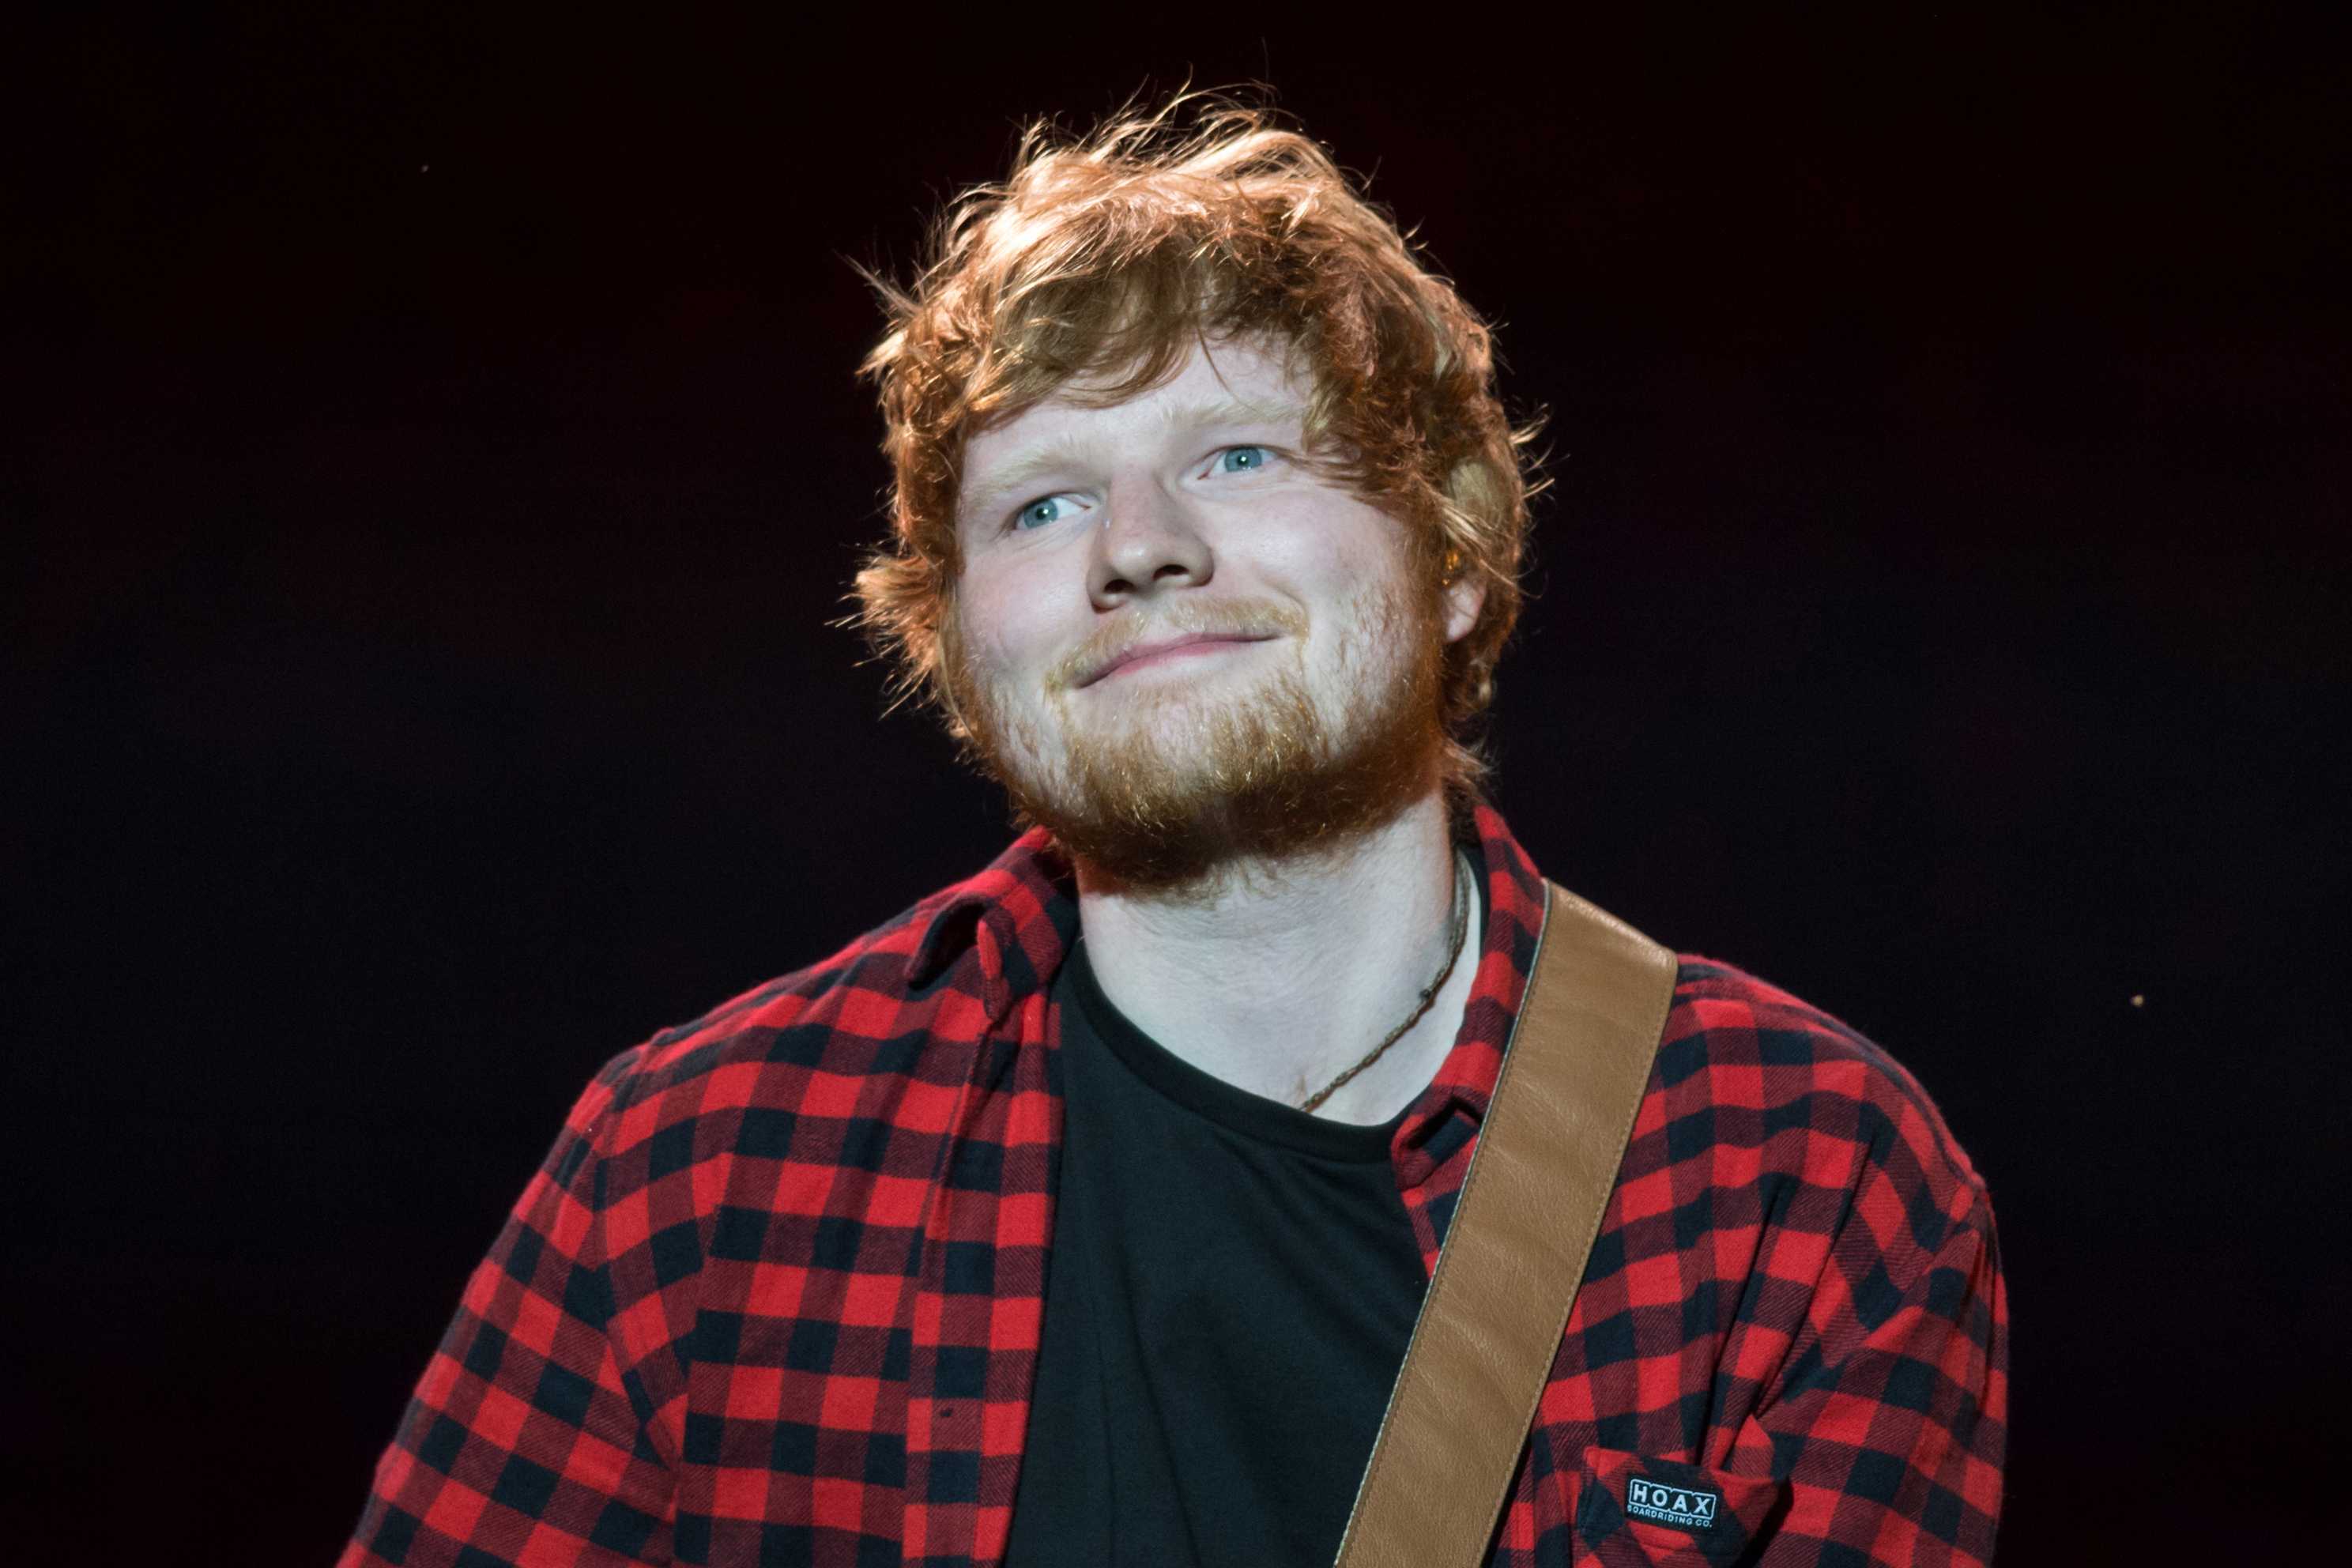 Singer Ed Sheeran announces engagement, and their 'cats are chuffed as well'